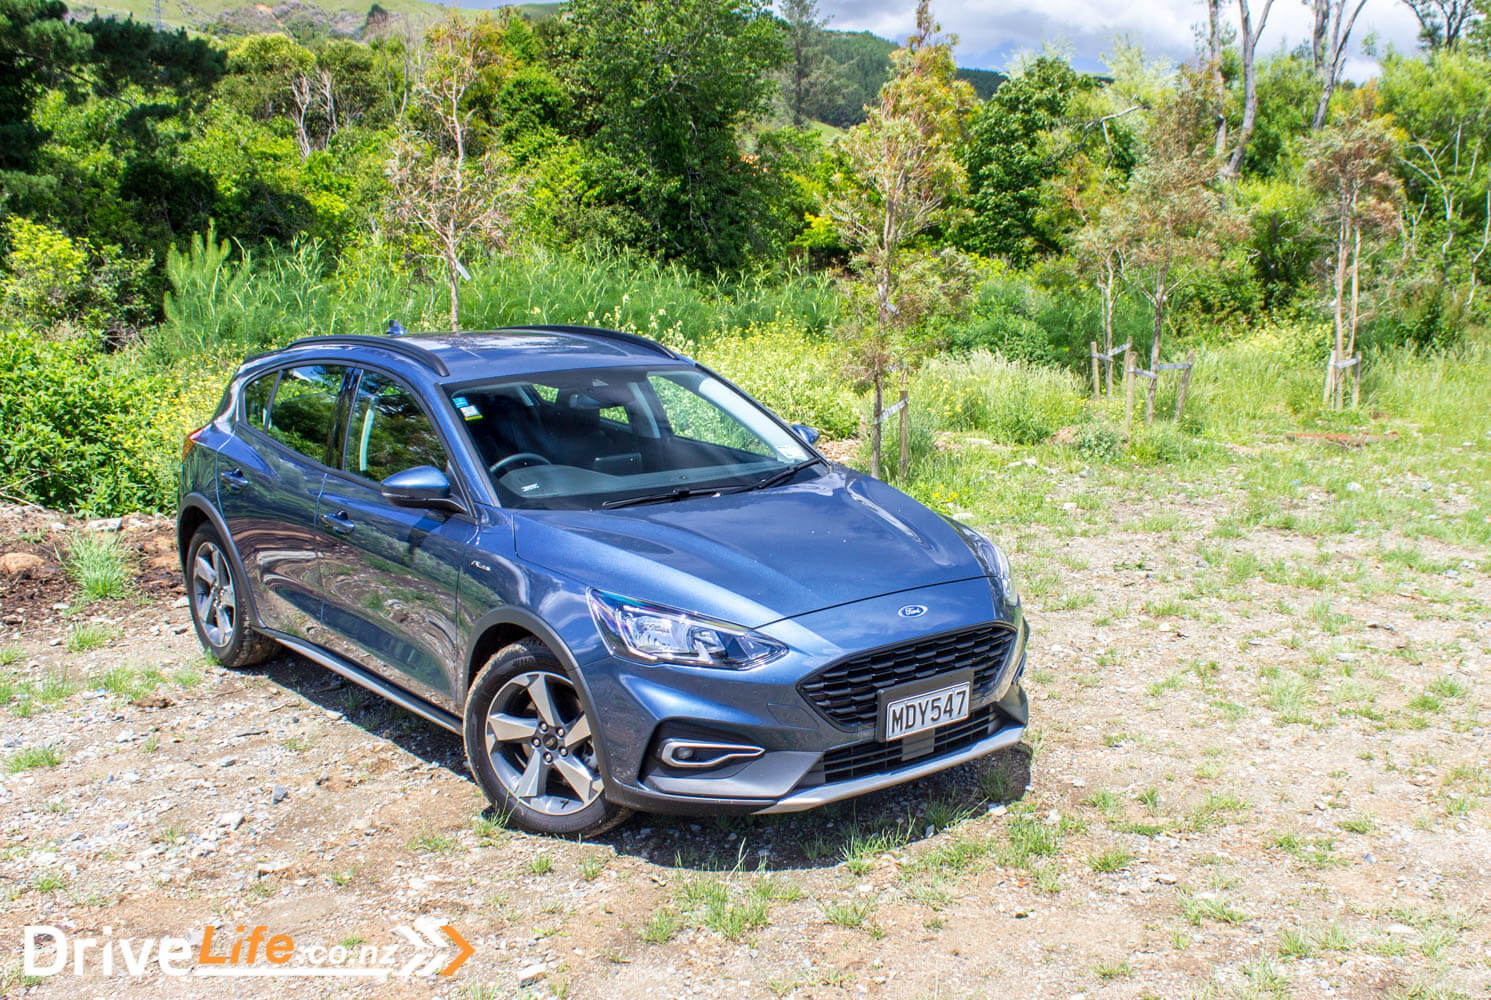 https://www.drivelife.co.nz/wp-content/uploads/2020/01/2019-ford-focus-active-drivelife-car-review-02.jpg